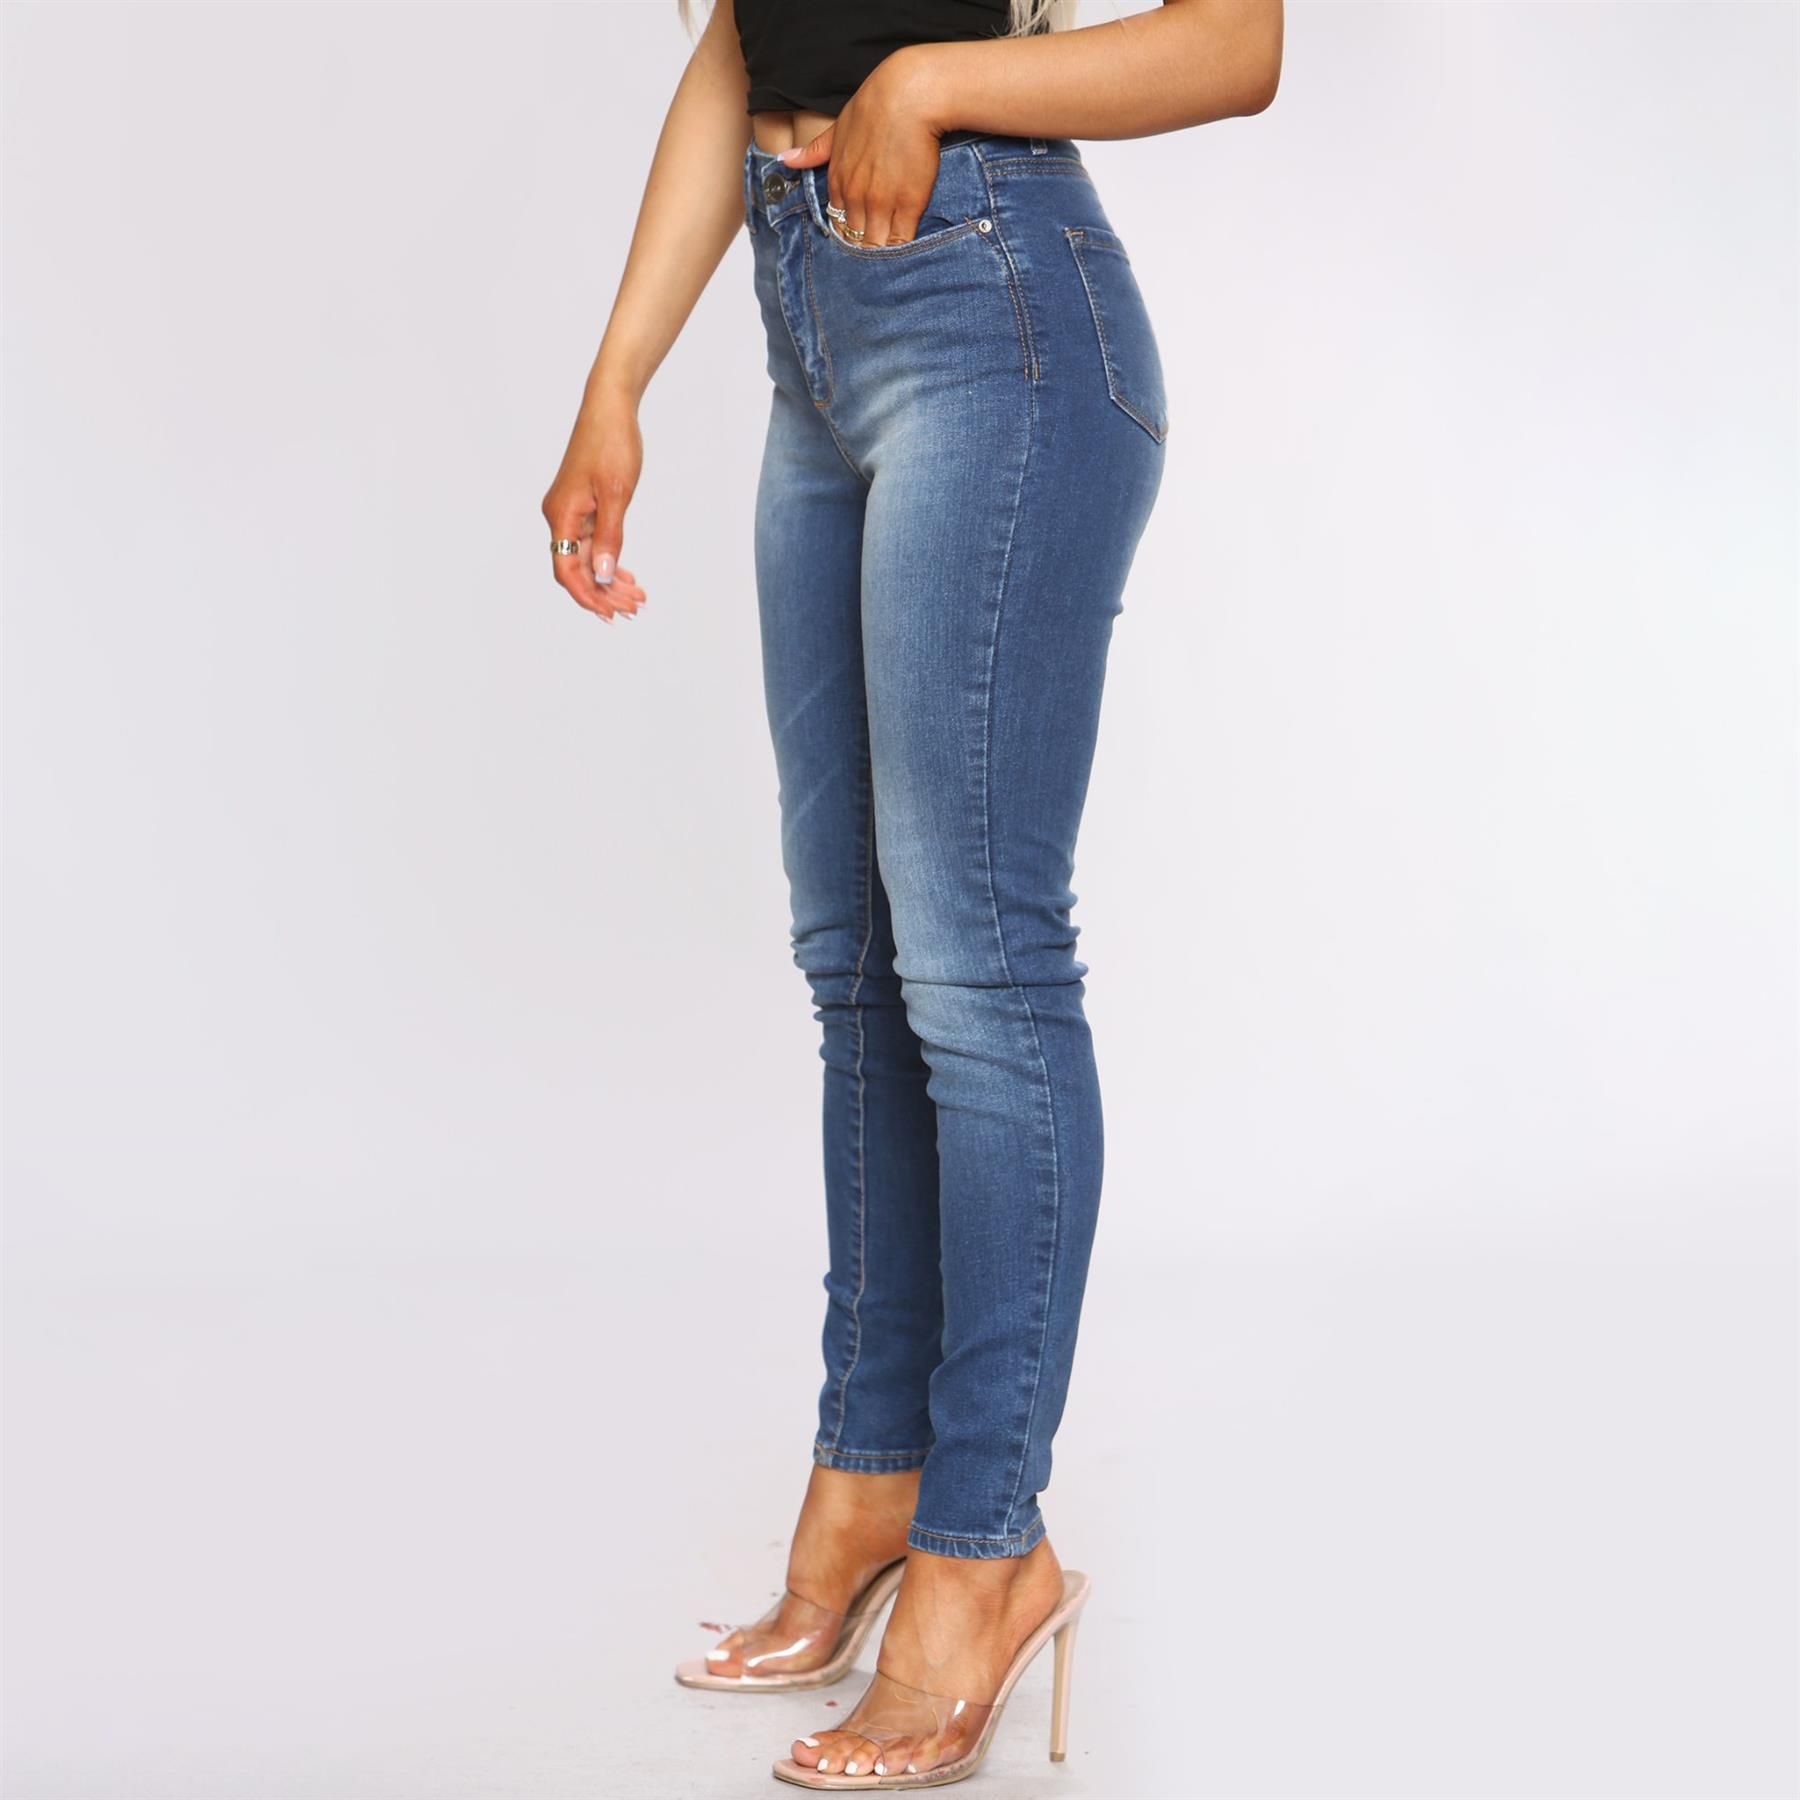 Enzo Womens Skinny Stretch Jeans, Slim Fitted Jeans With Faded Detail to Leg, Featuring 2 Front Pockets, 2 Back Pockets and 1 Coin Pocket, Zip Fly Fastening, 98% Cotton, 2% Elastane, Ideal for casual wear